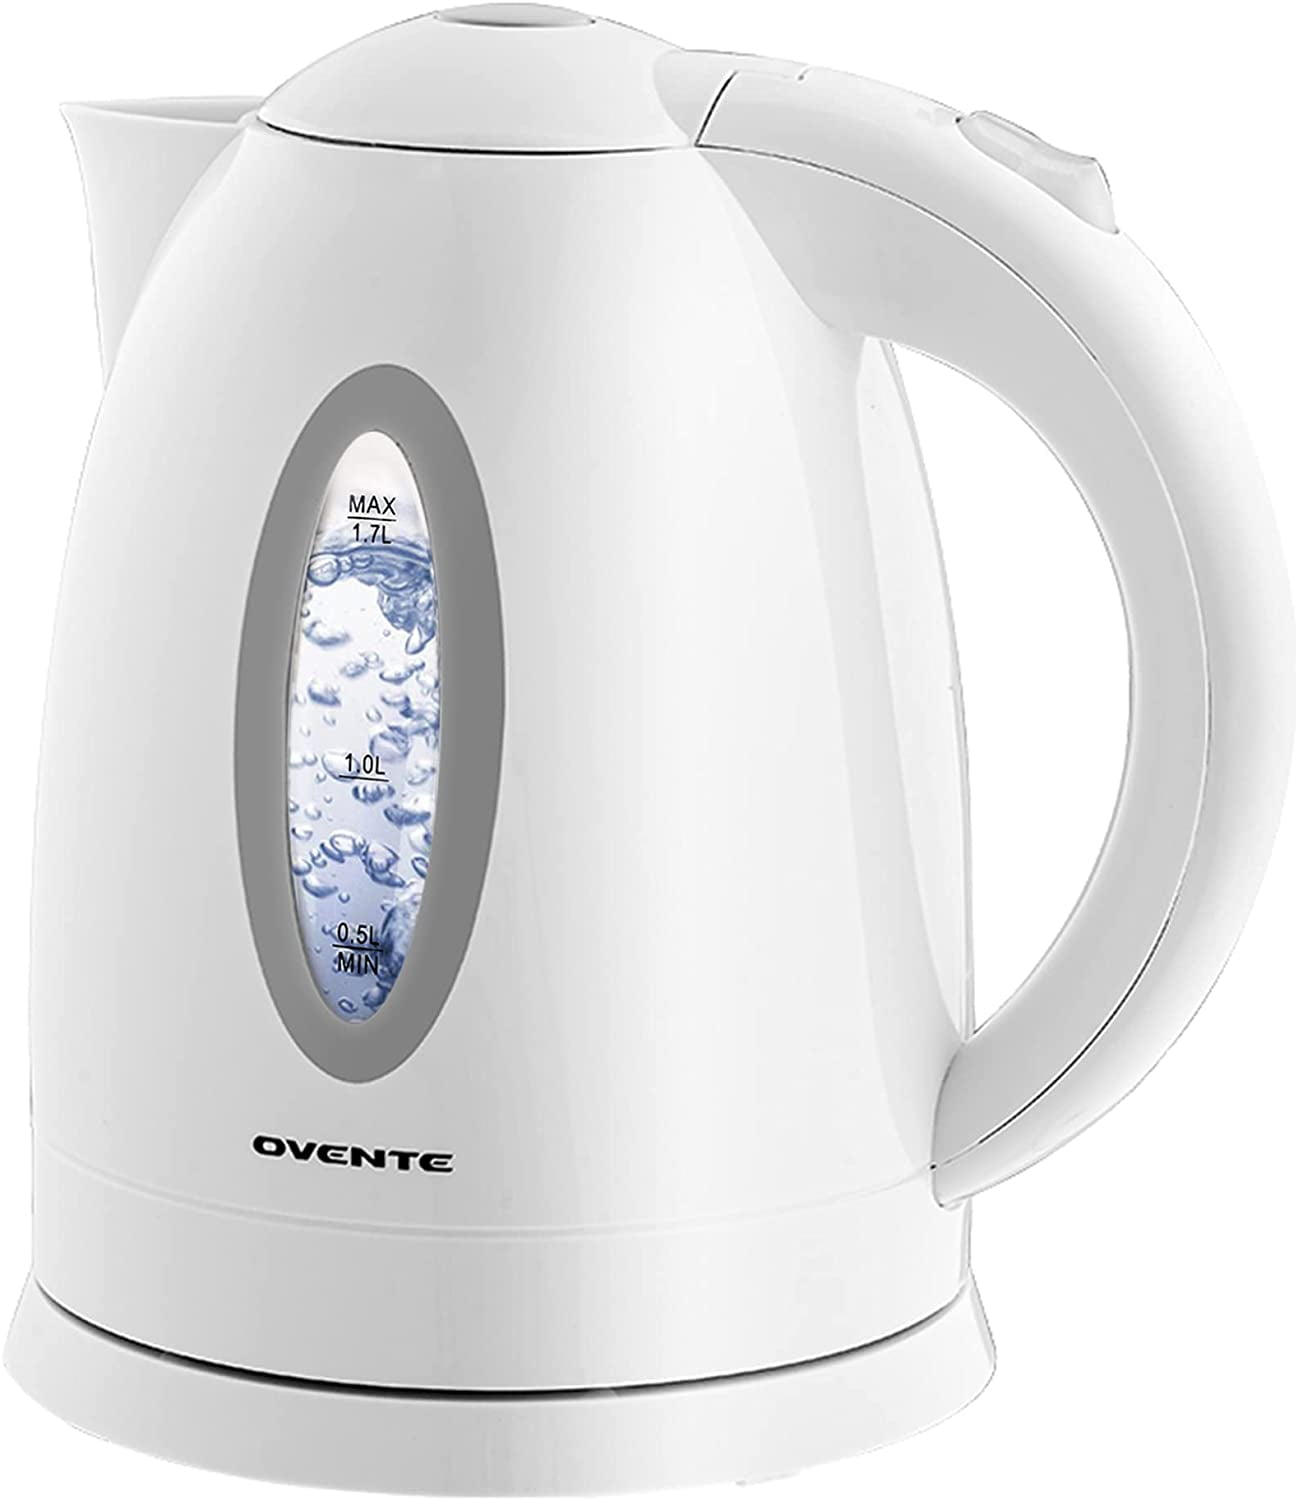 1100 Watt BPA-Free Portable Tea Maker Fast Heating Element with Auto Shut-Off and Boil Dry Protection Ovente Electric Hot Water Kettle 1.7 Liter with LED Light Brew Coffee & Beverage White KP72W